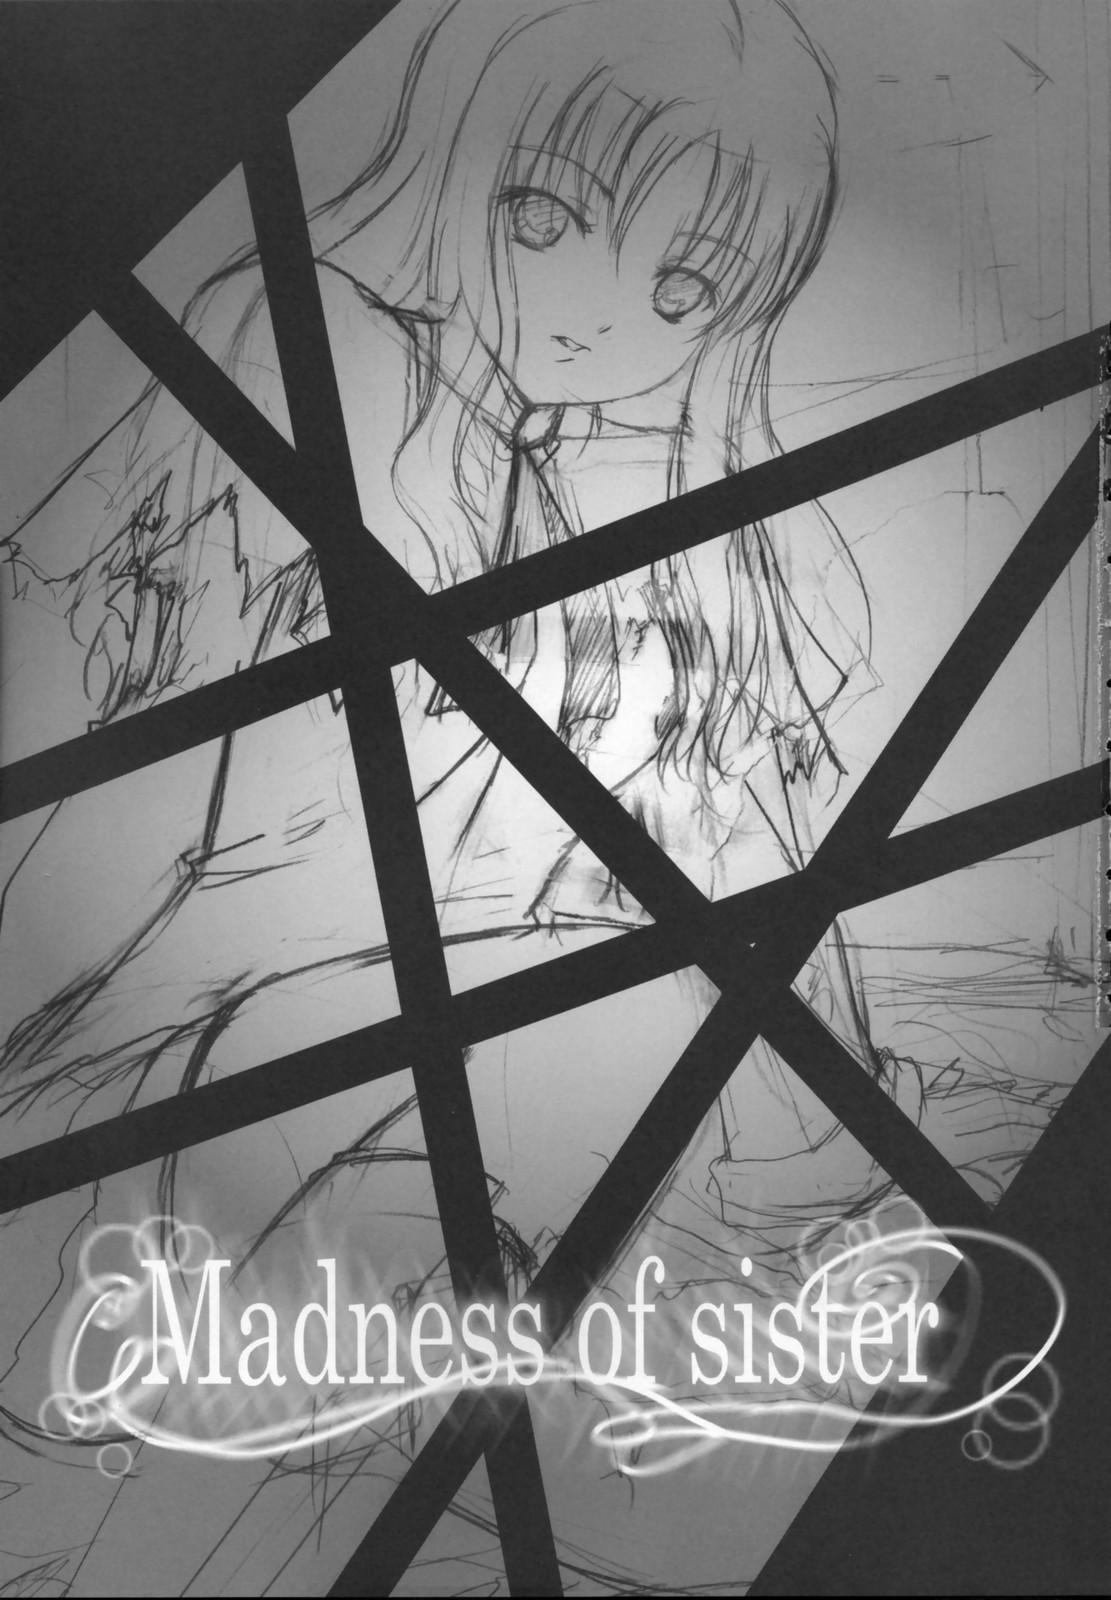 Madness of sister 1